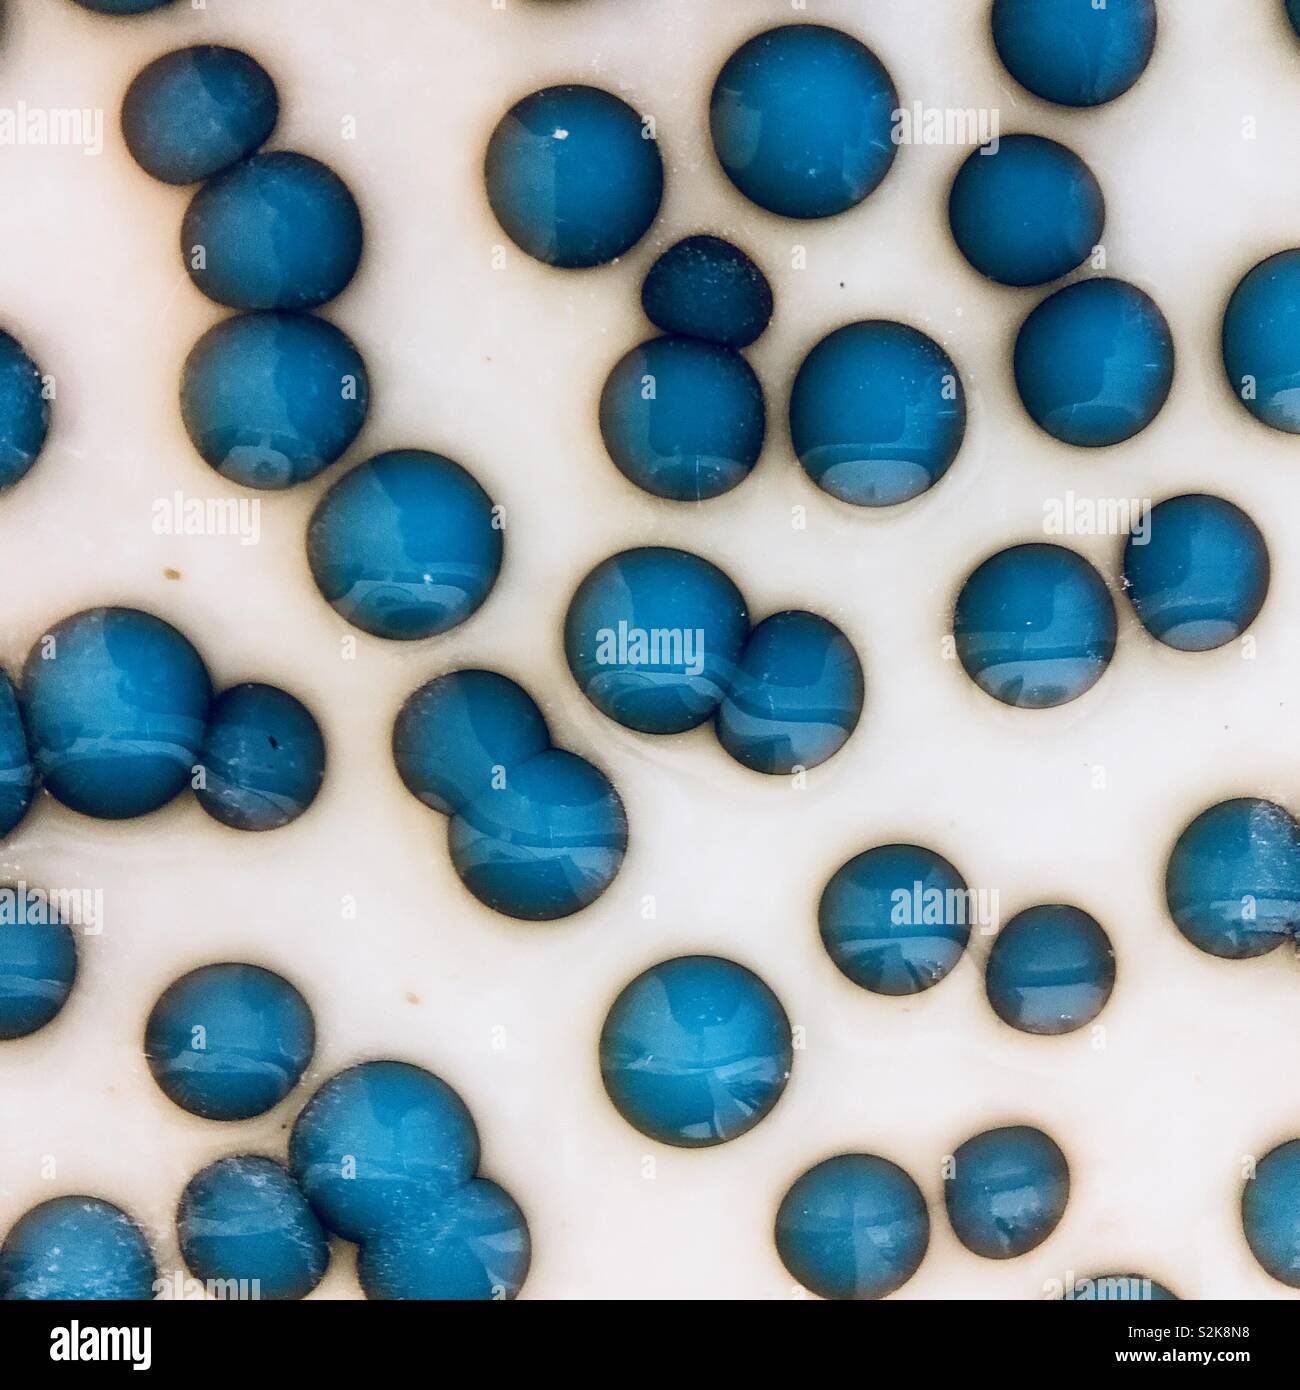 Turquoise blue glass dots on pale vanilla glass made by hand shows chemical reactions between two different glasses Stock Photo